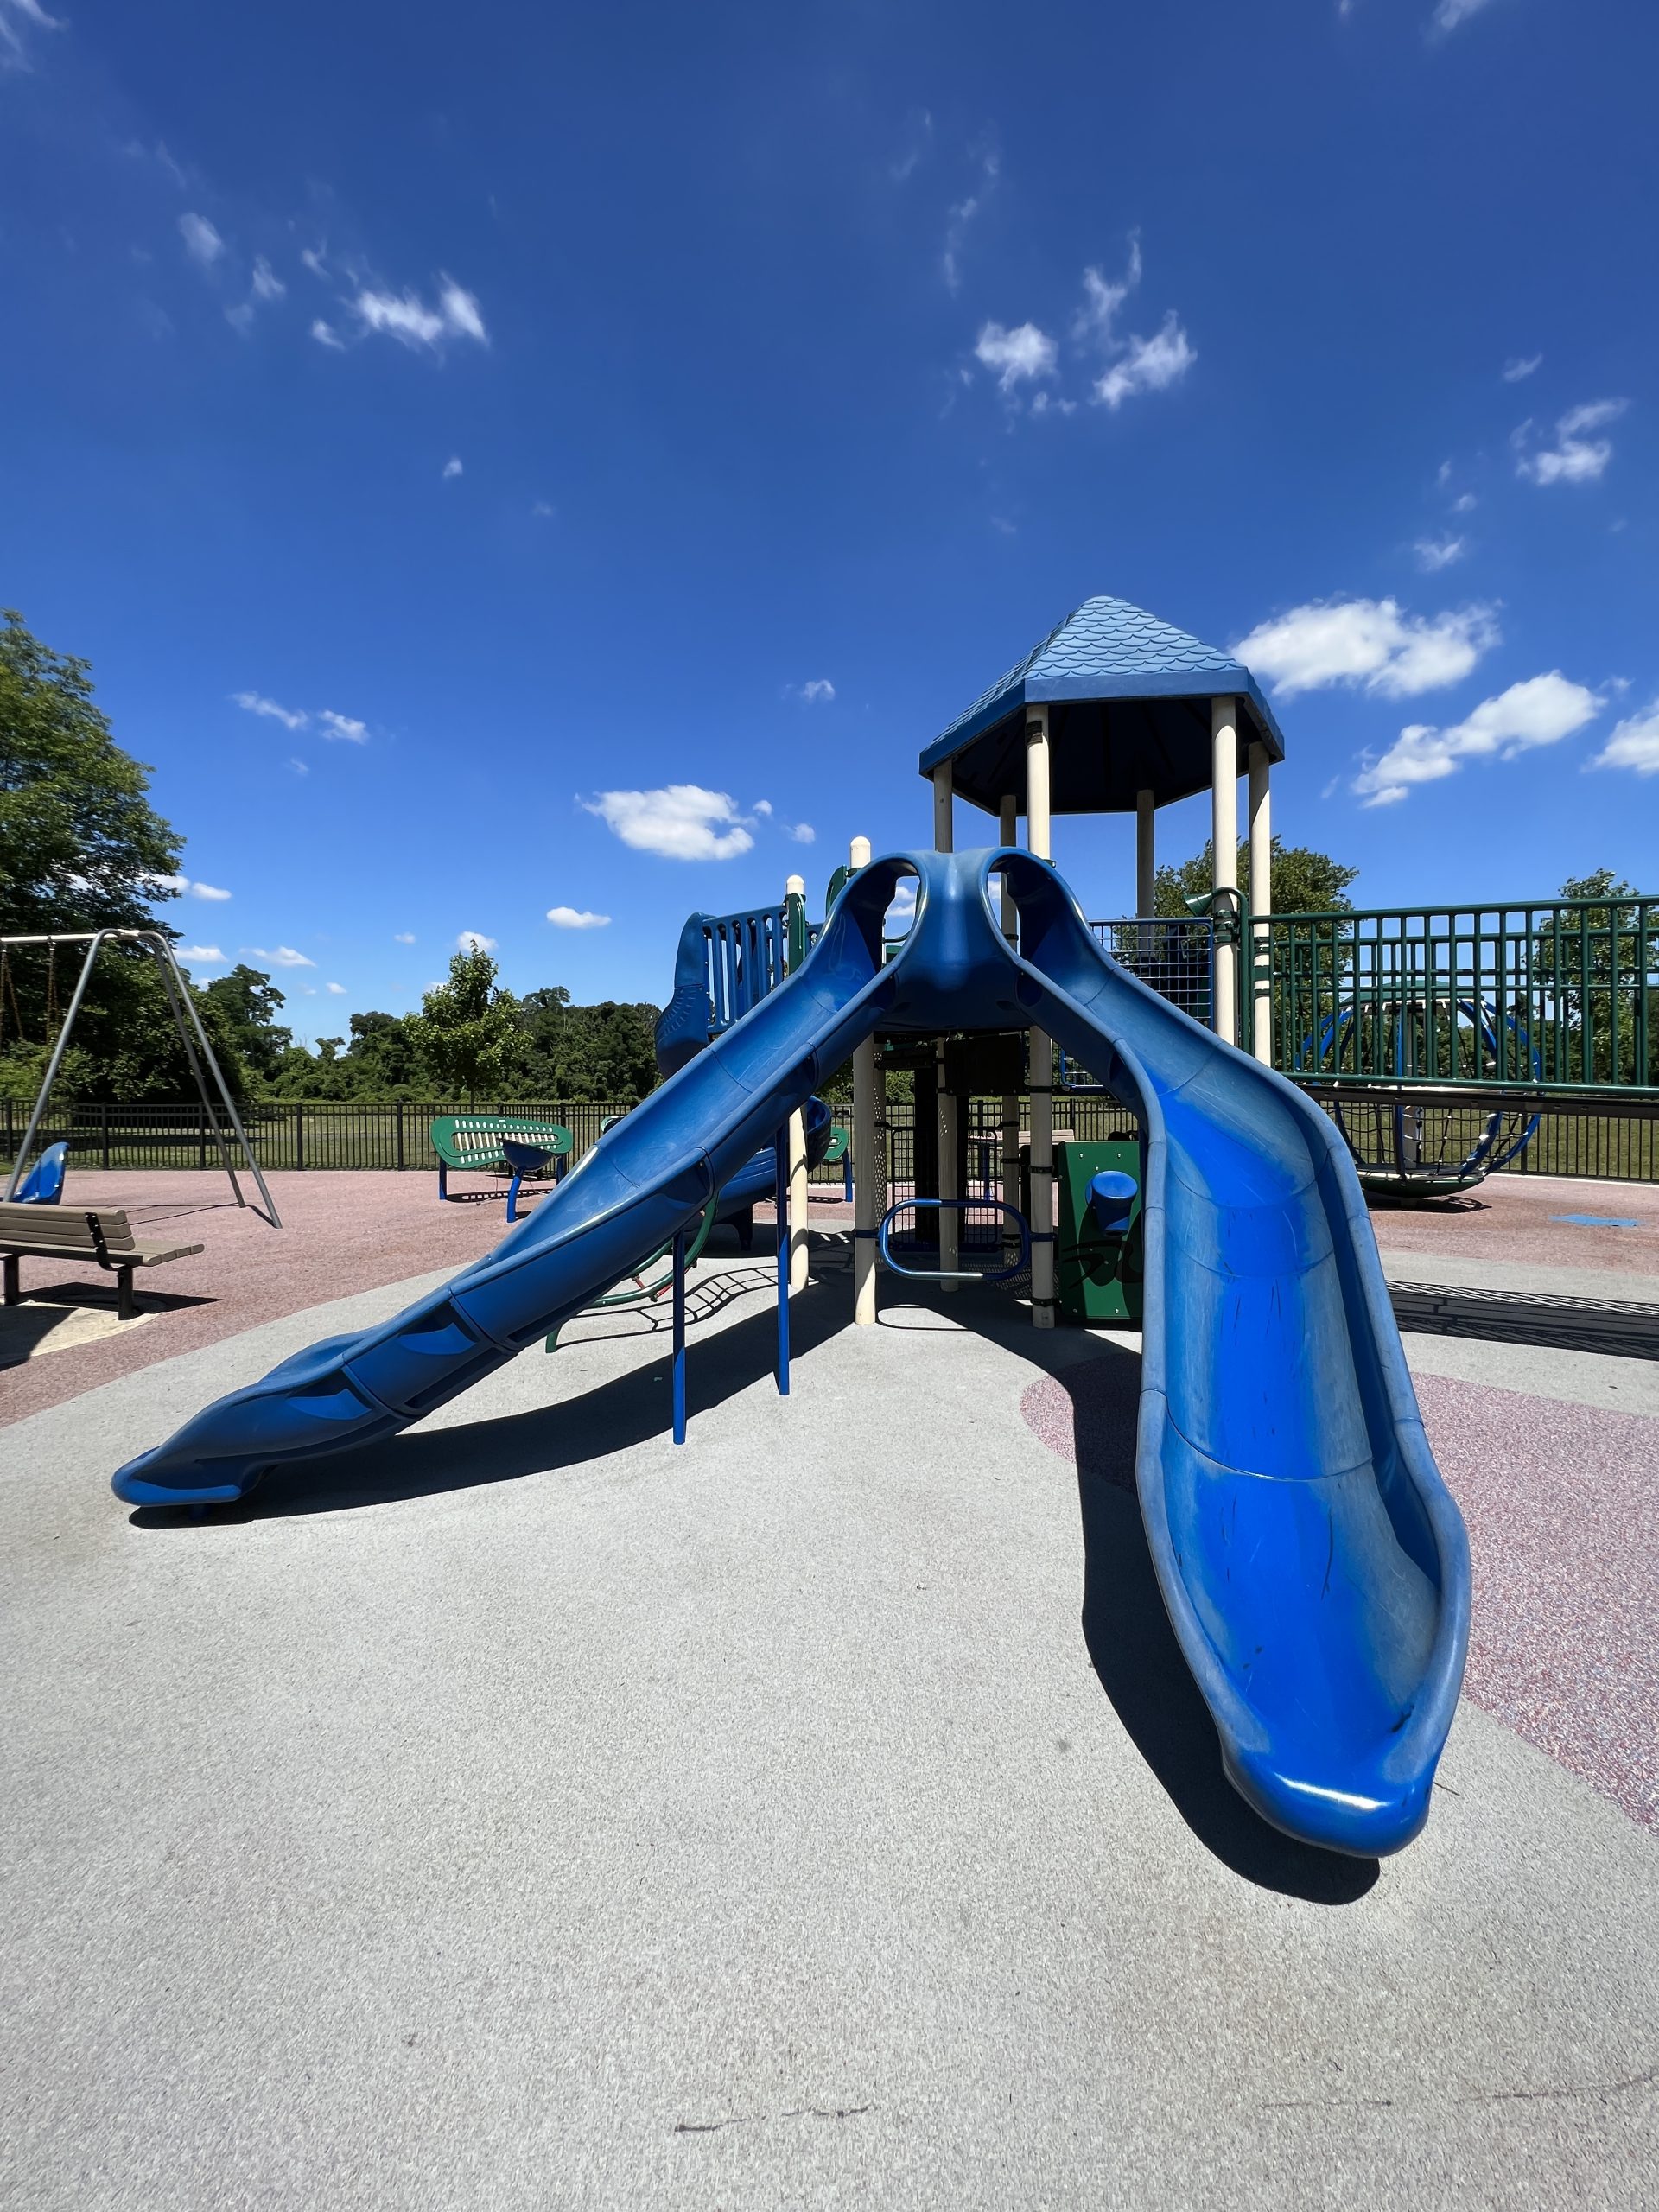 Challenger Place Park Playground in Colts Neck NJ both curvy slides 1